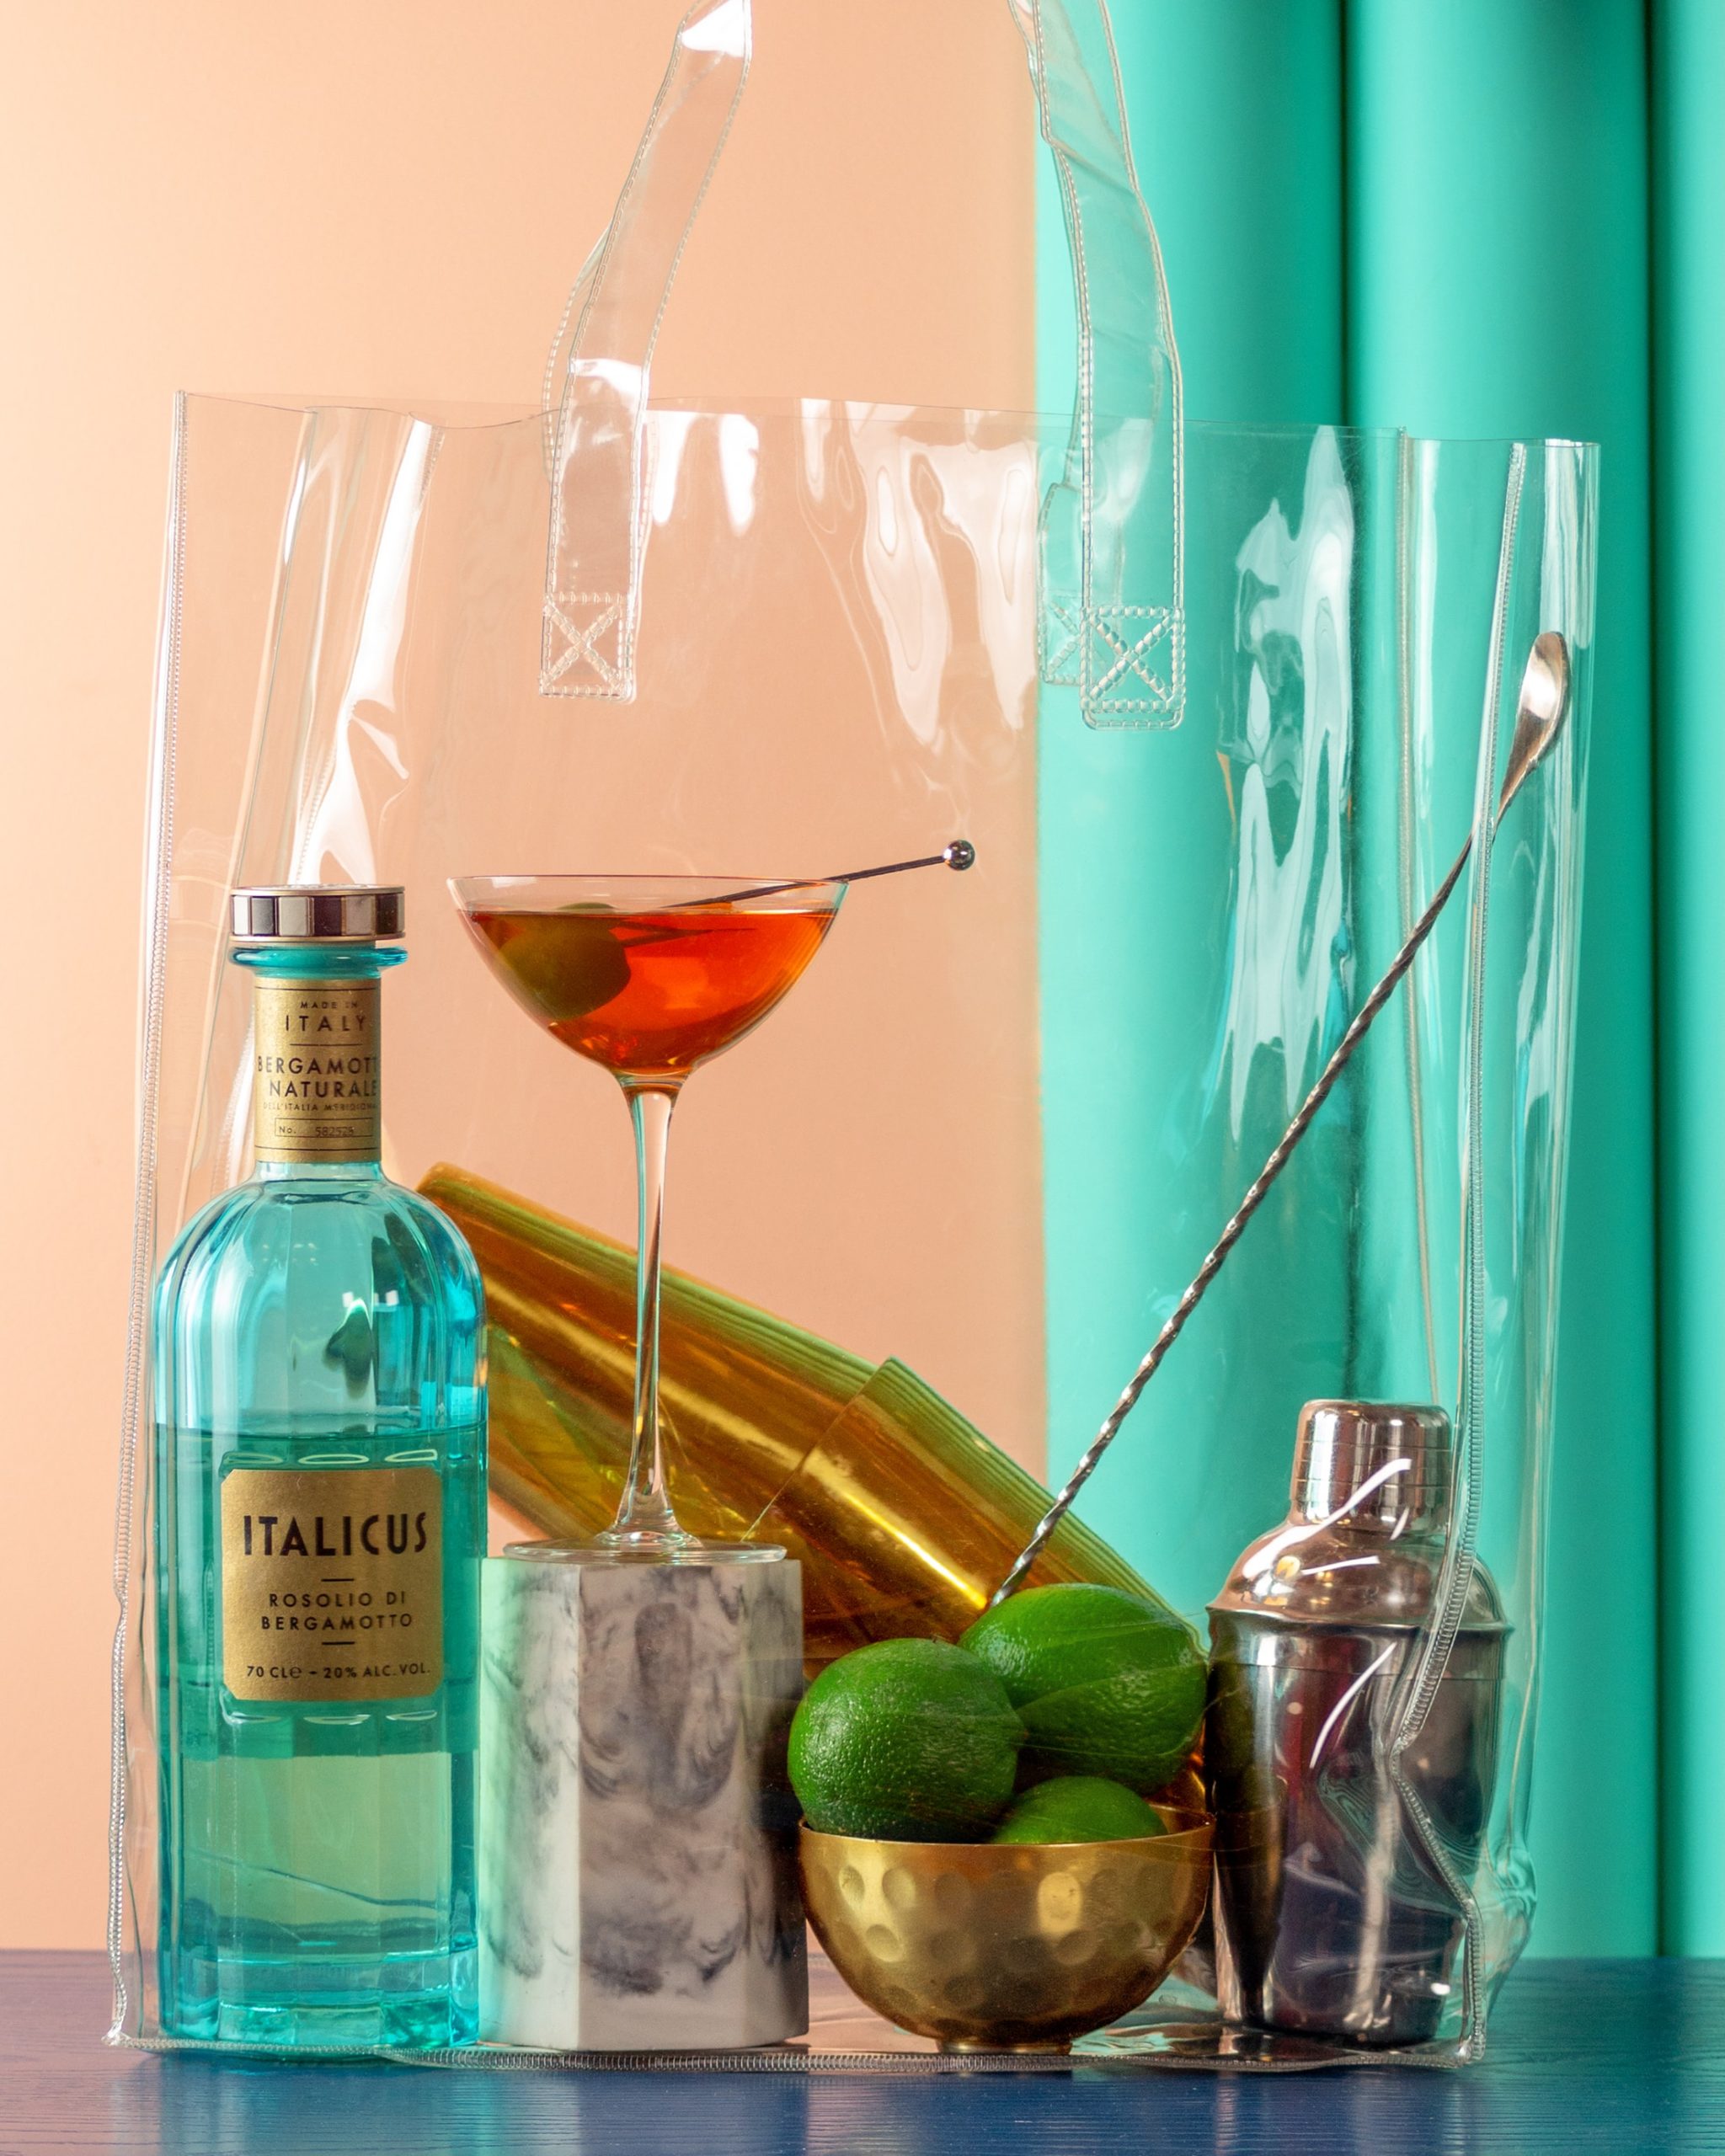 A bottle of Italicus, a martini, a bowl of limes, and cocktail shakers on a bar in a transparent bag.